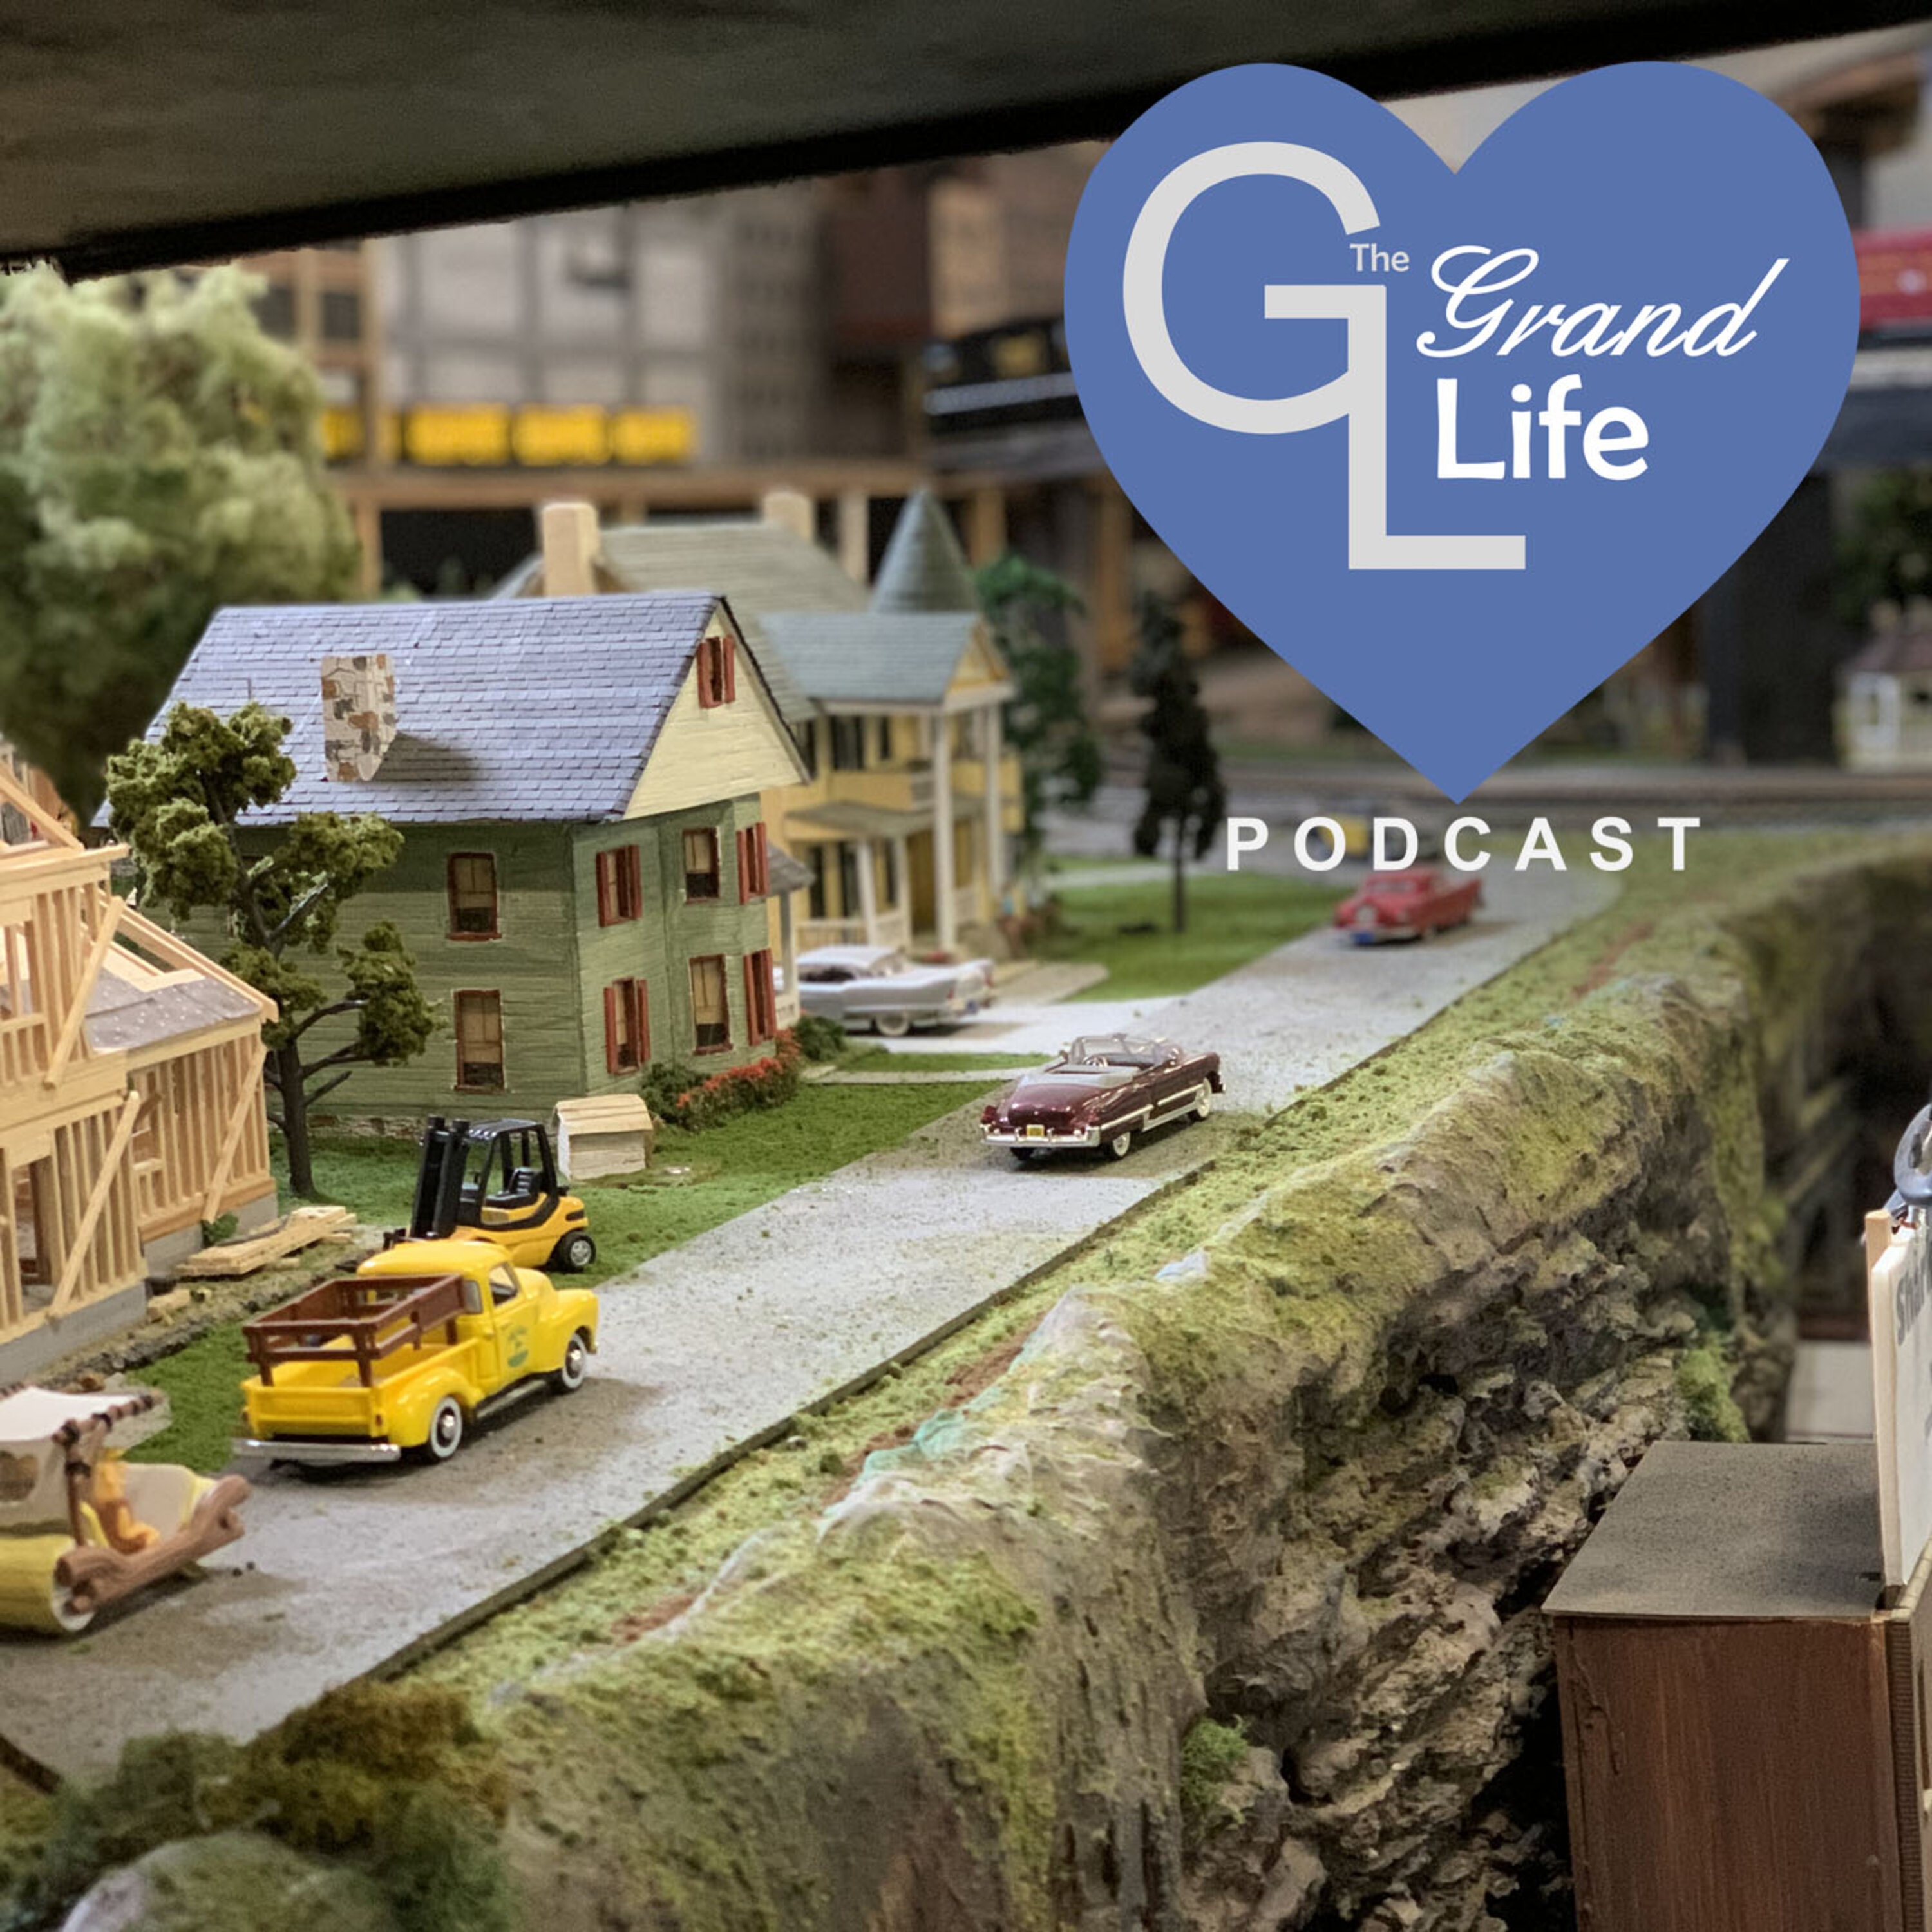 S6E33: Toy Trains Become Real